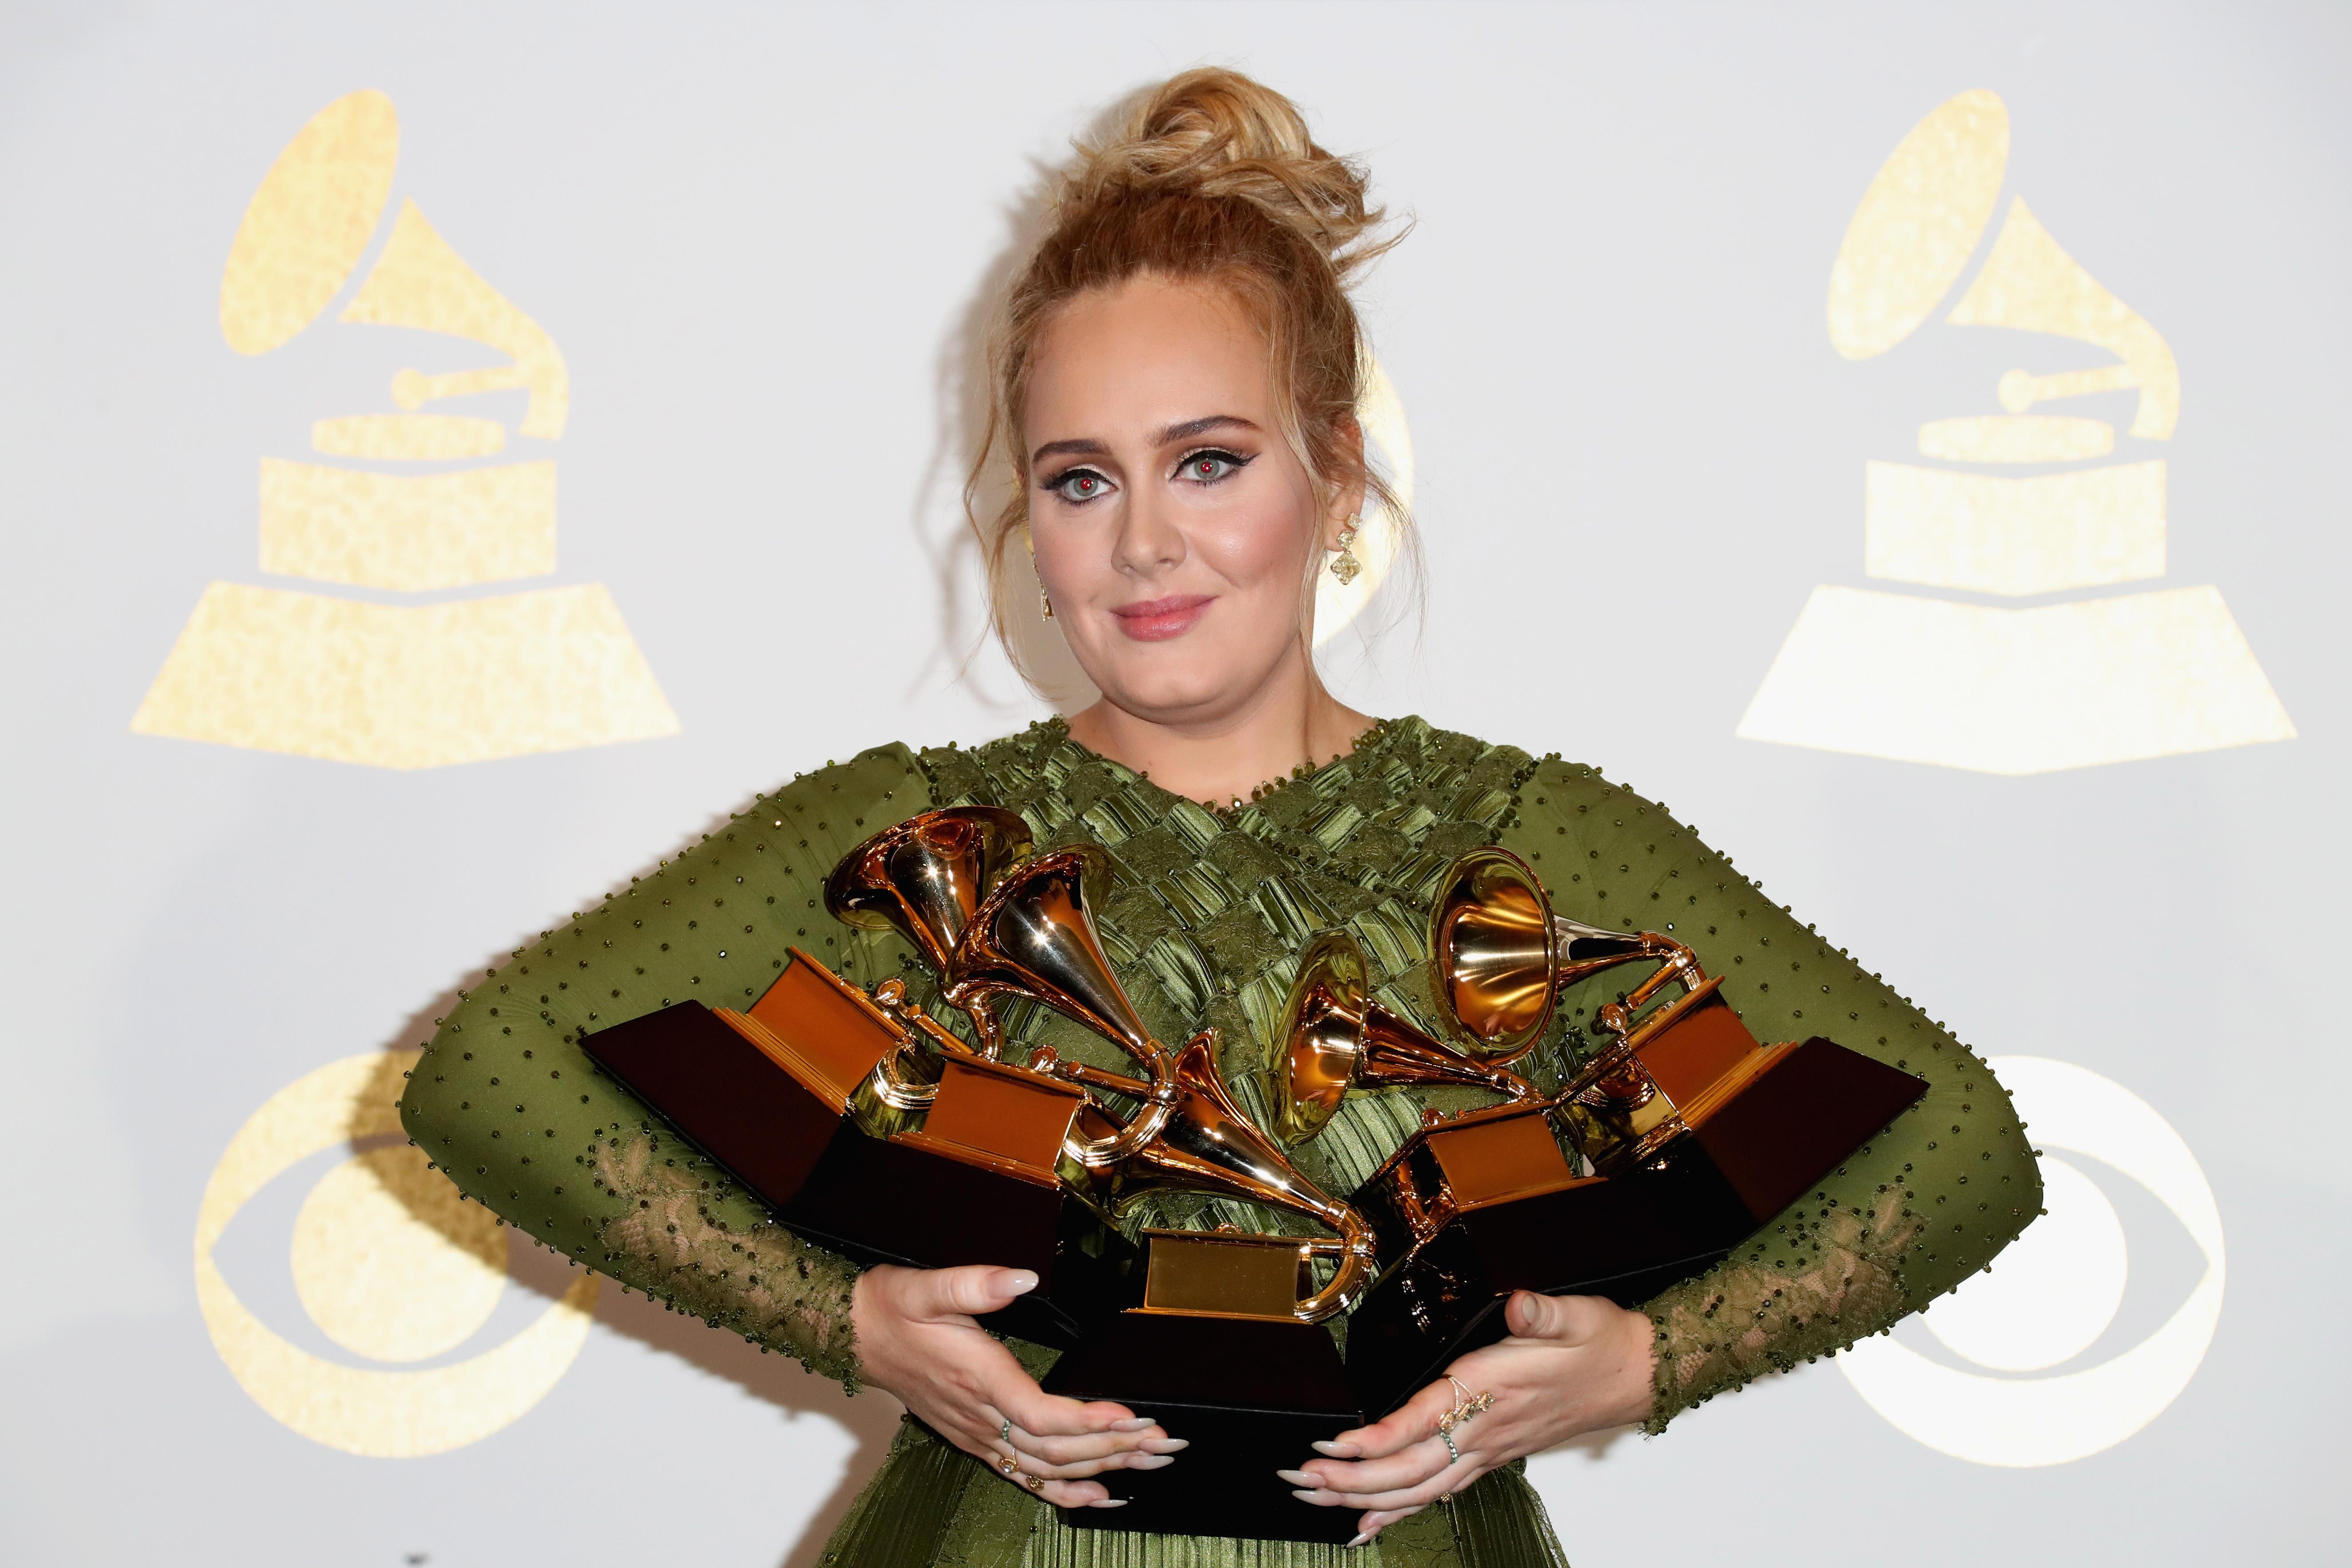 Adele with her Grammys